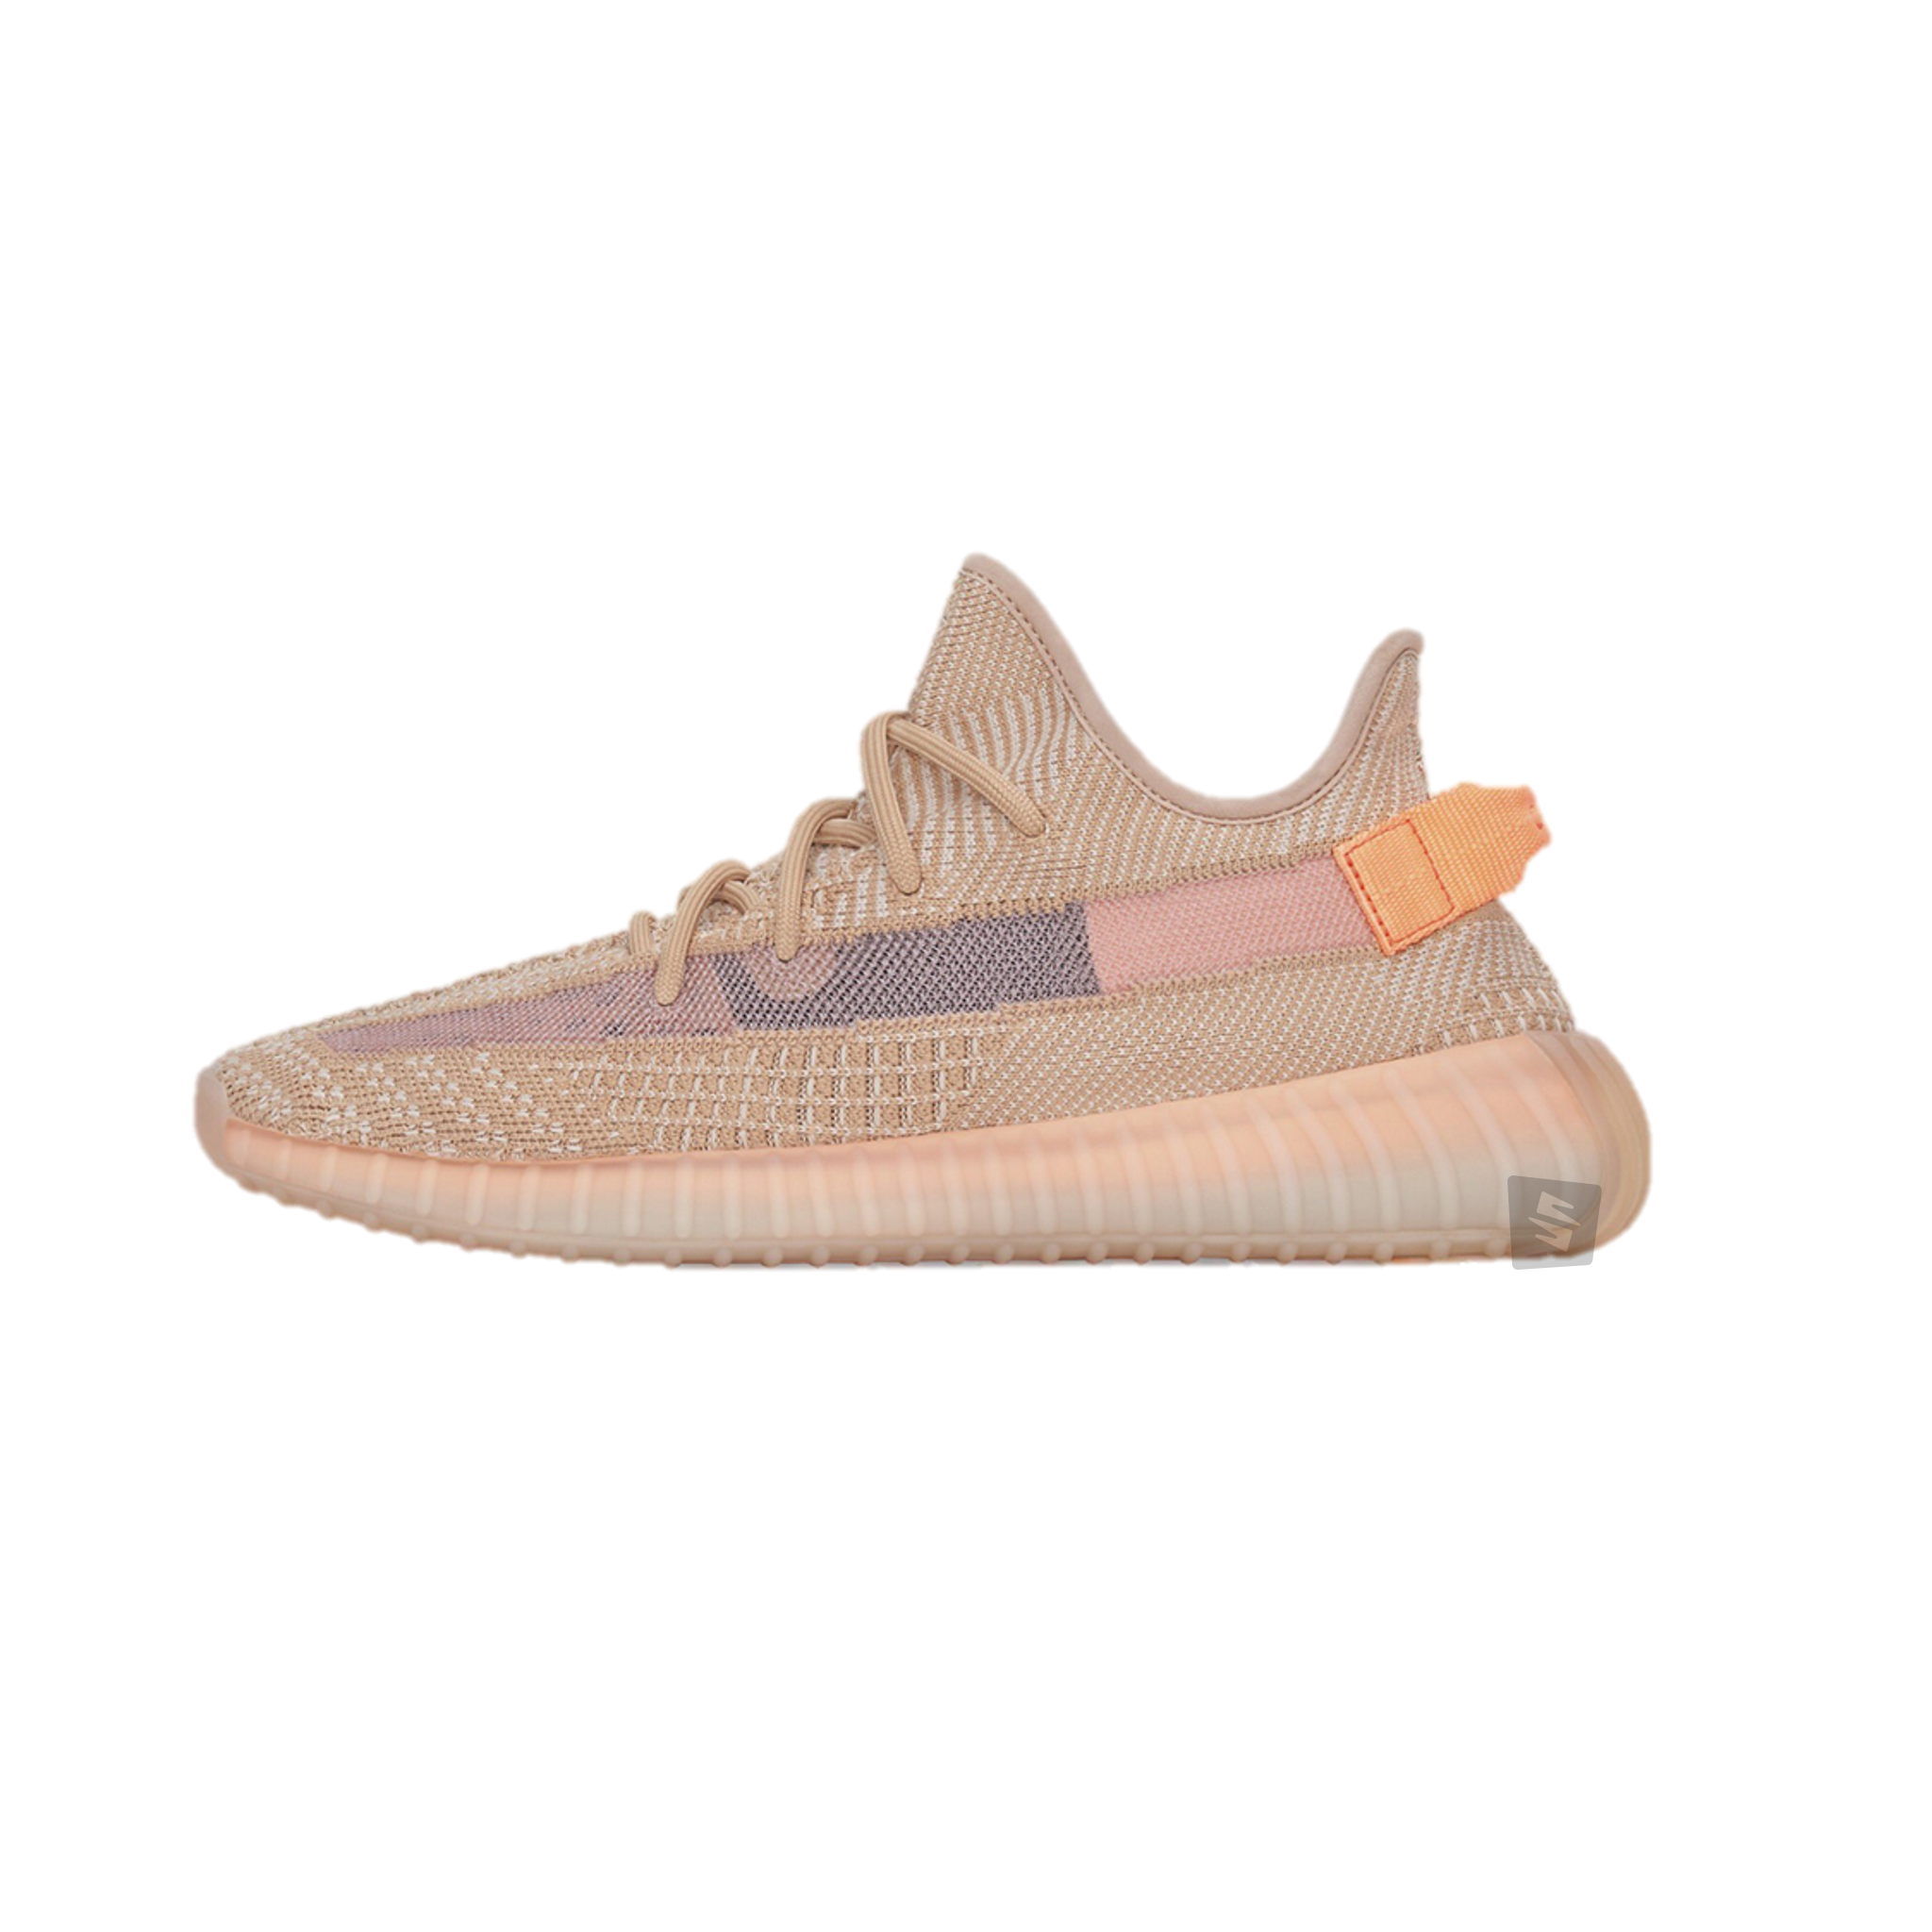 yeezy boost 350 v2 clay size 7